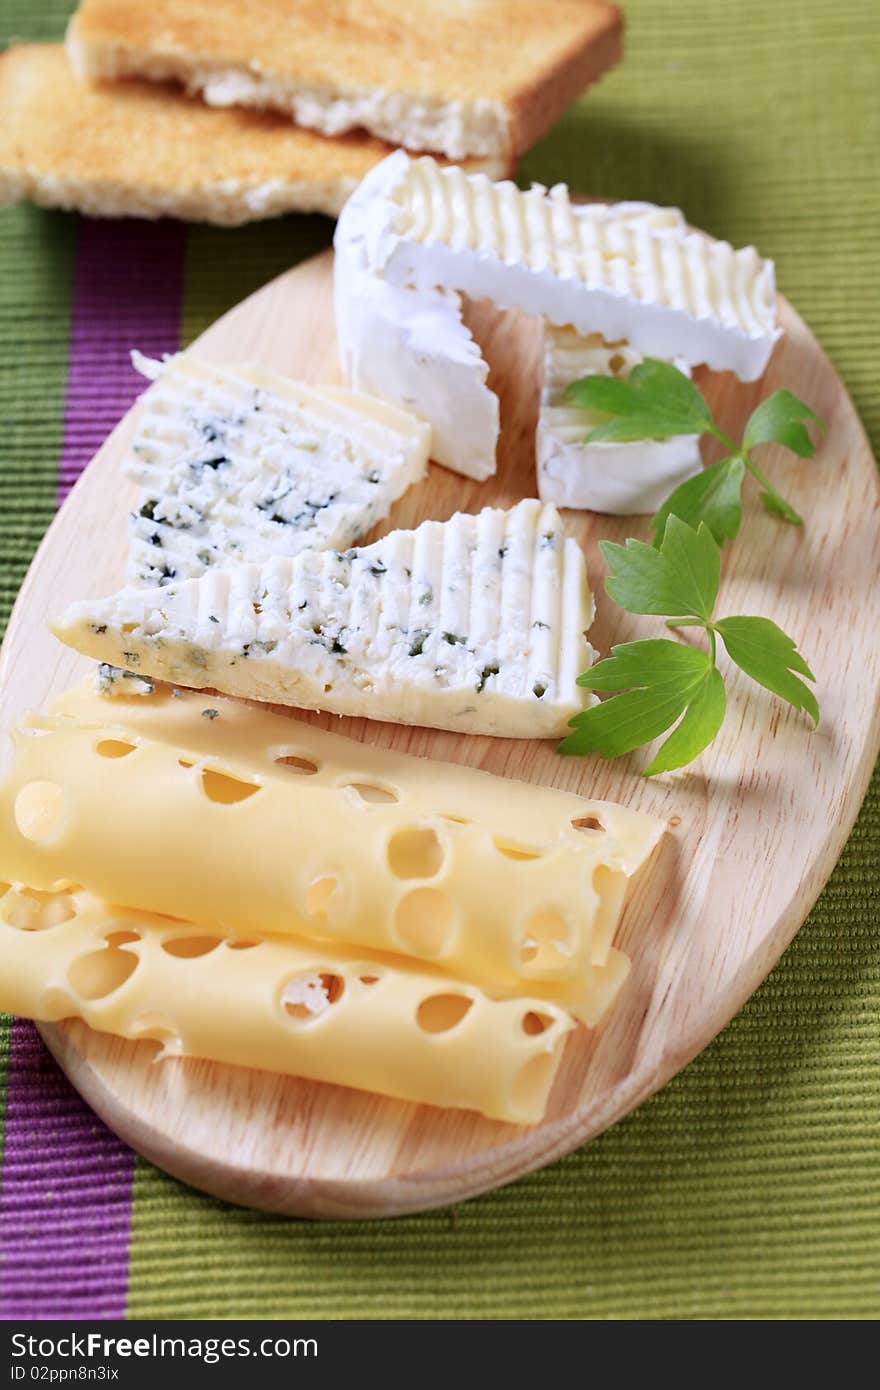 Variety of cheeses on a cutting board